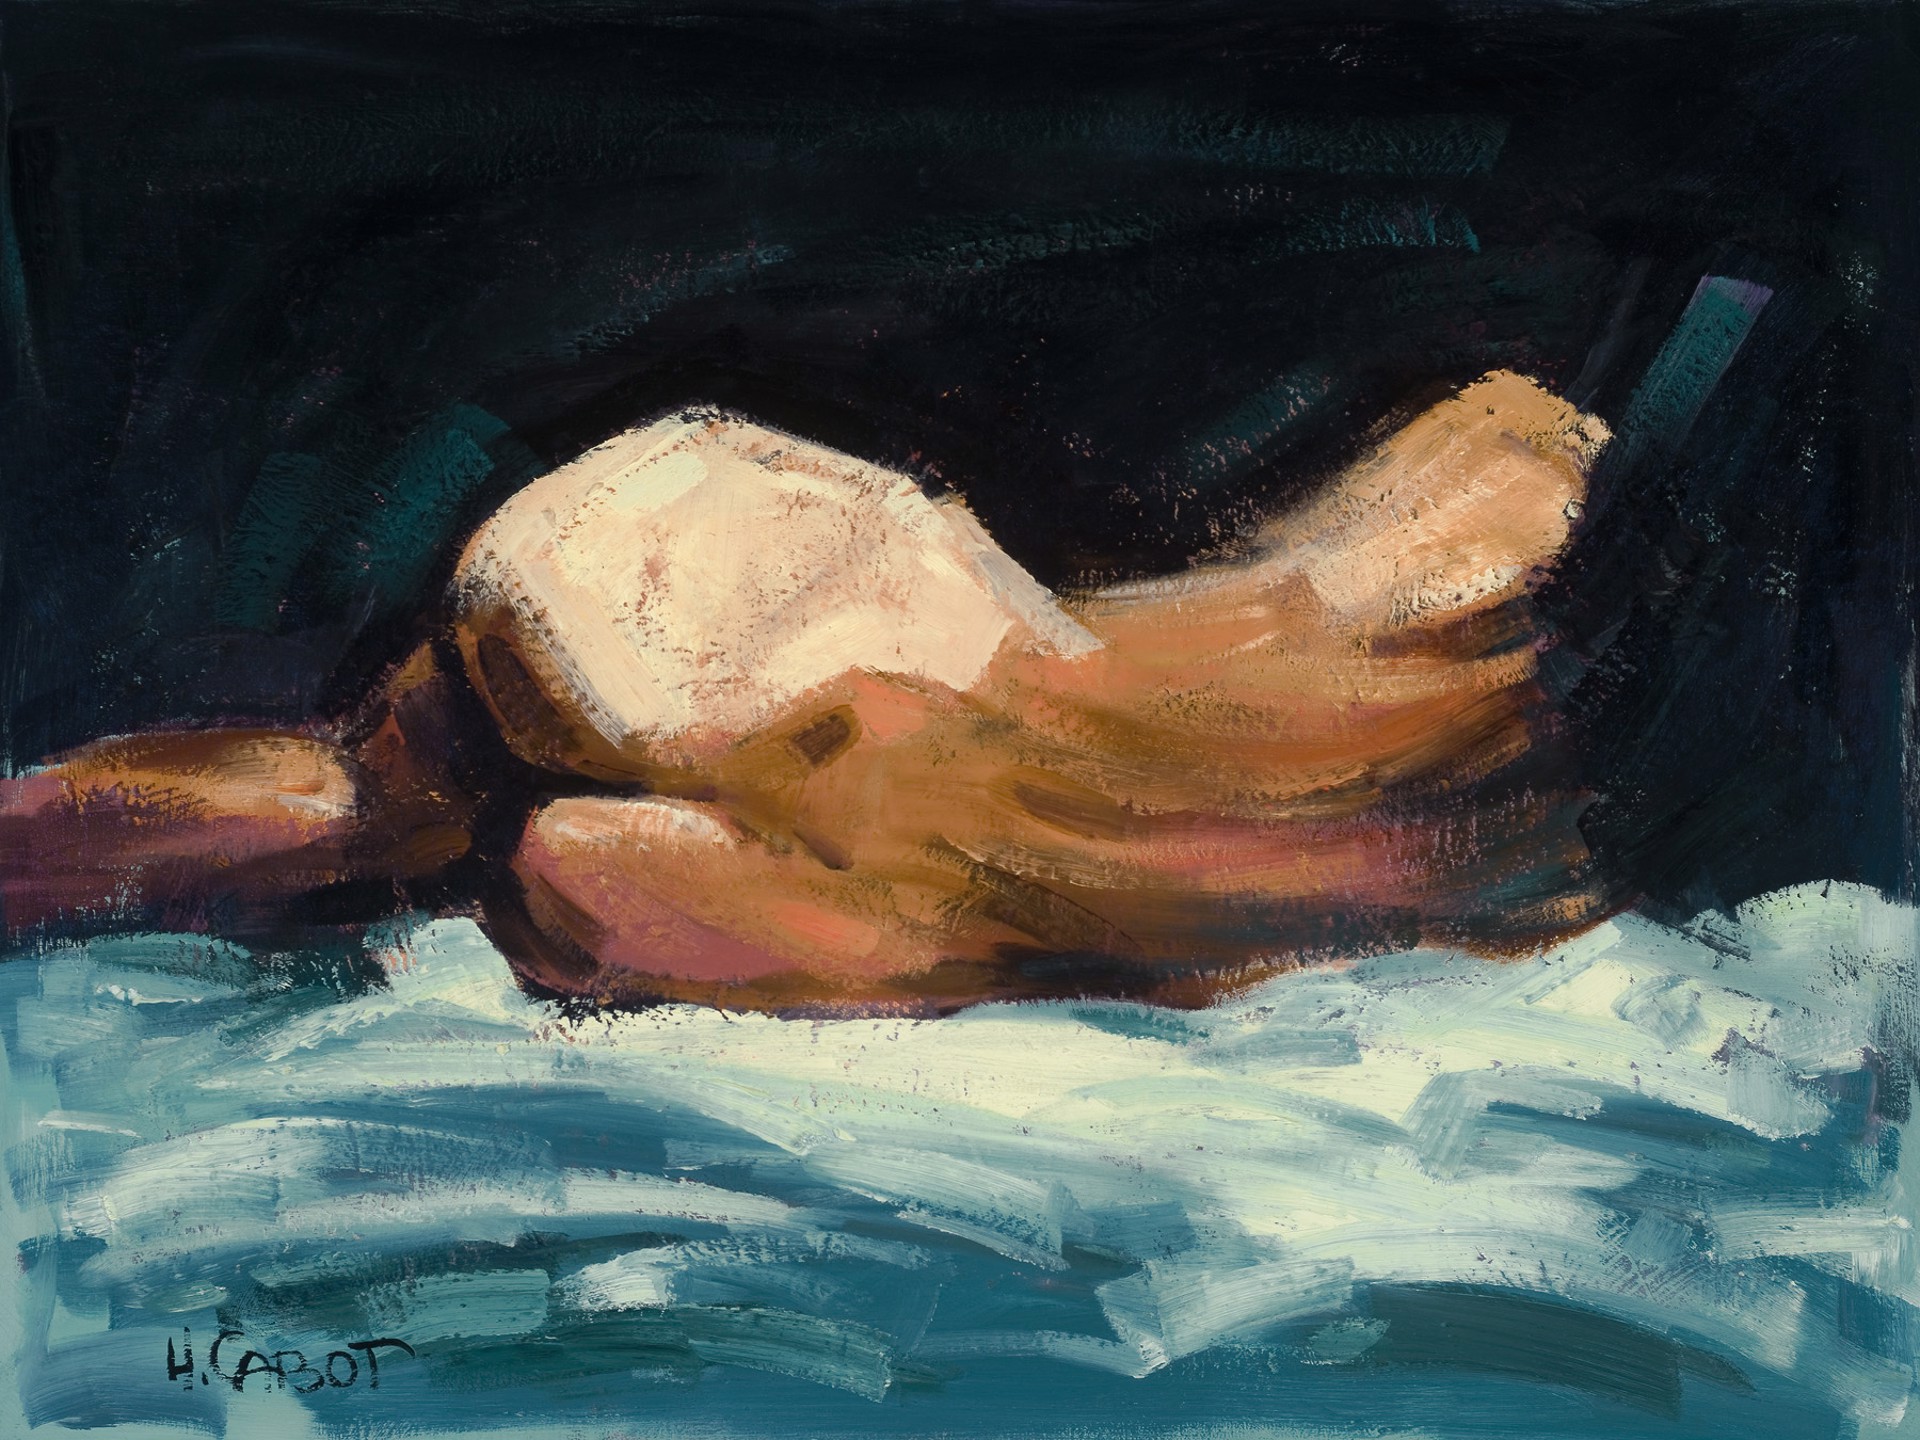 Reclining Nude by Giclees Hugh Cabot